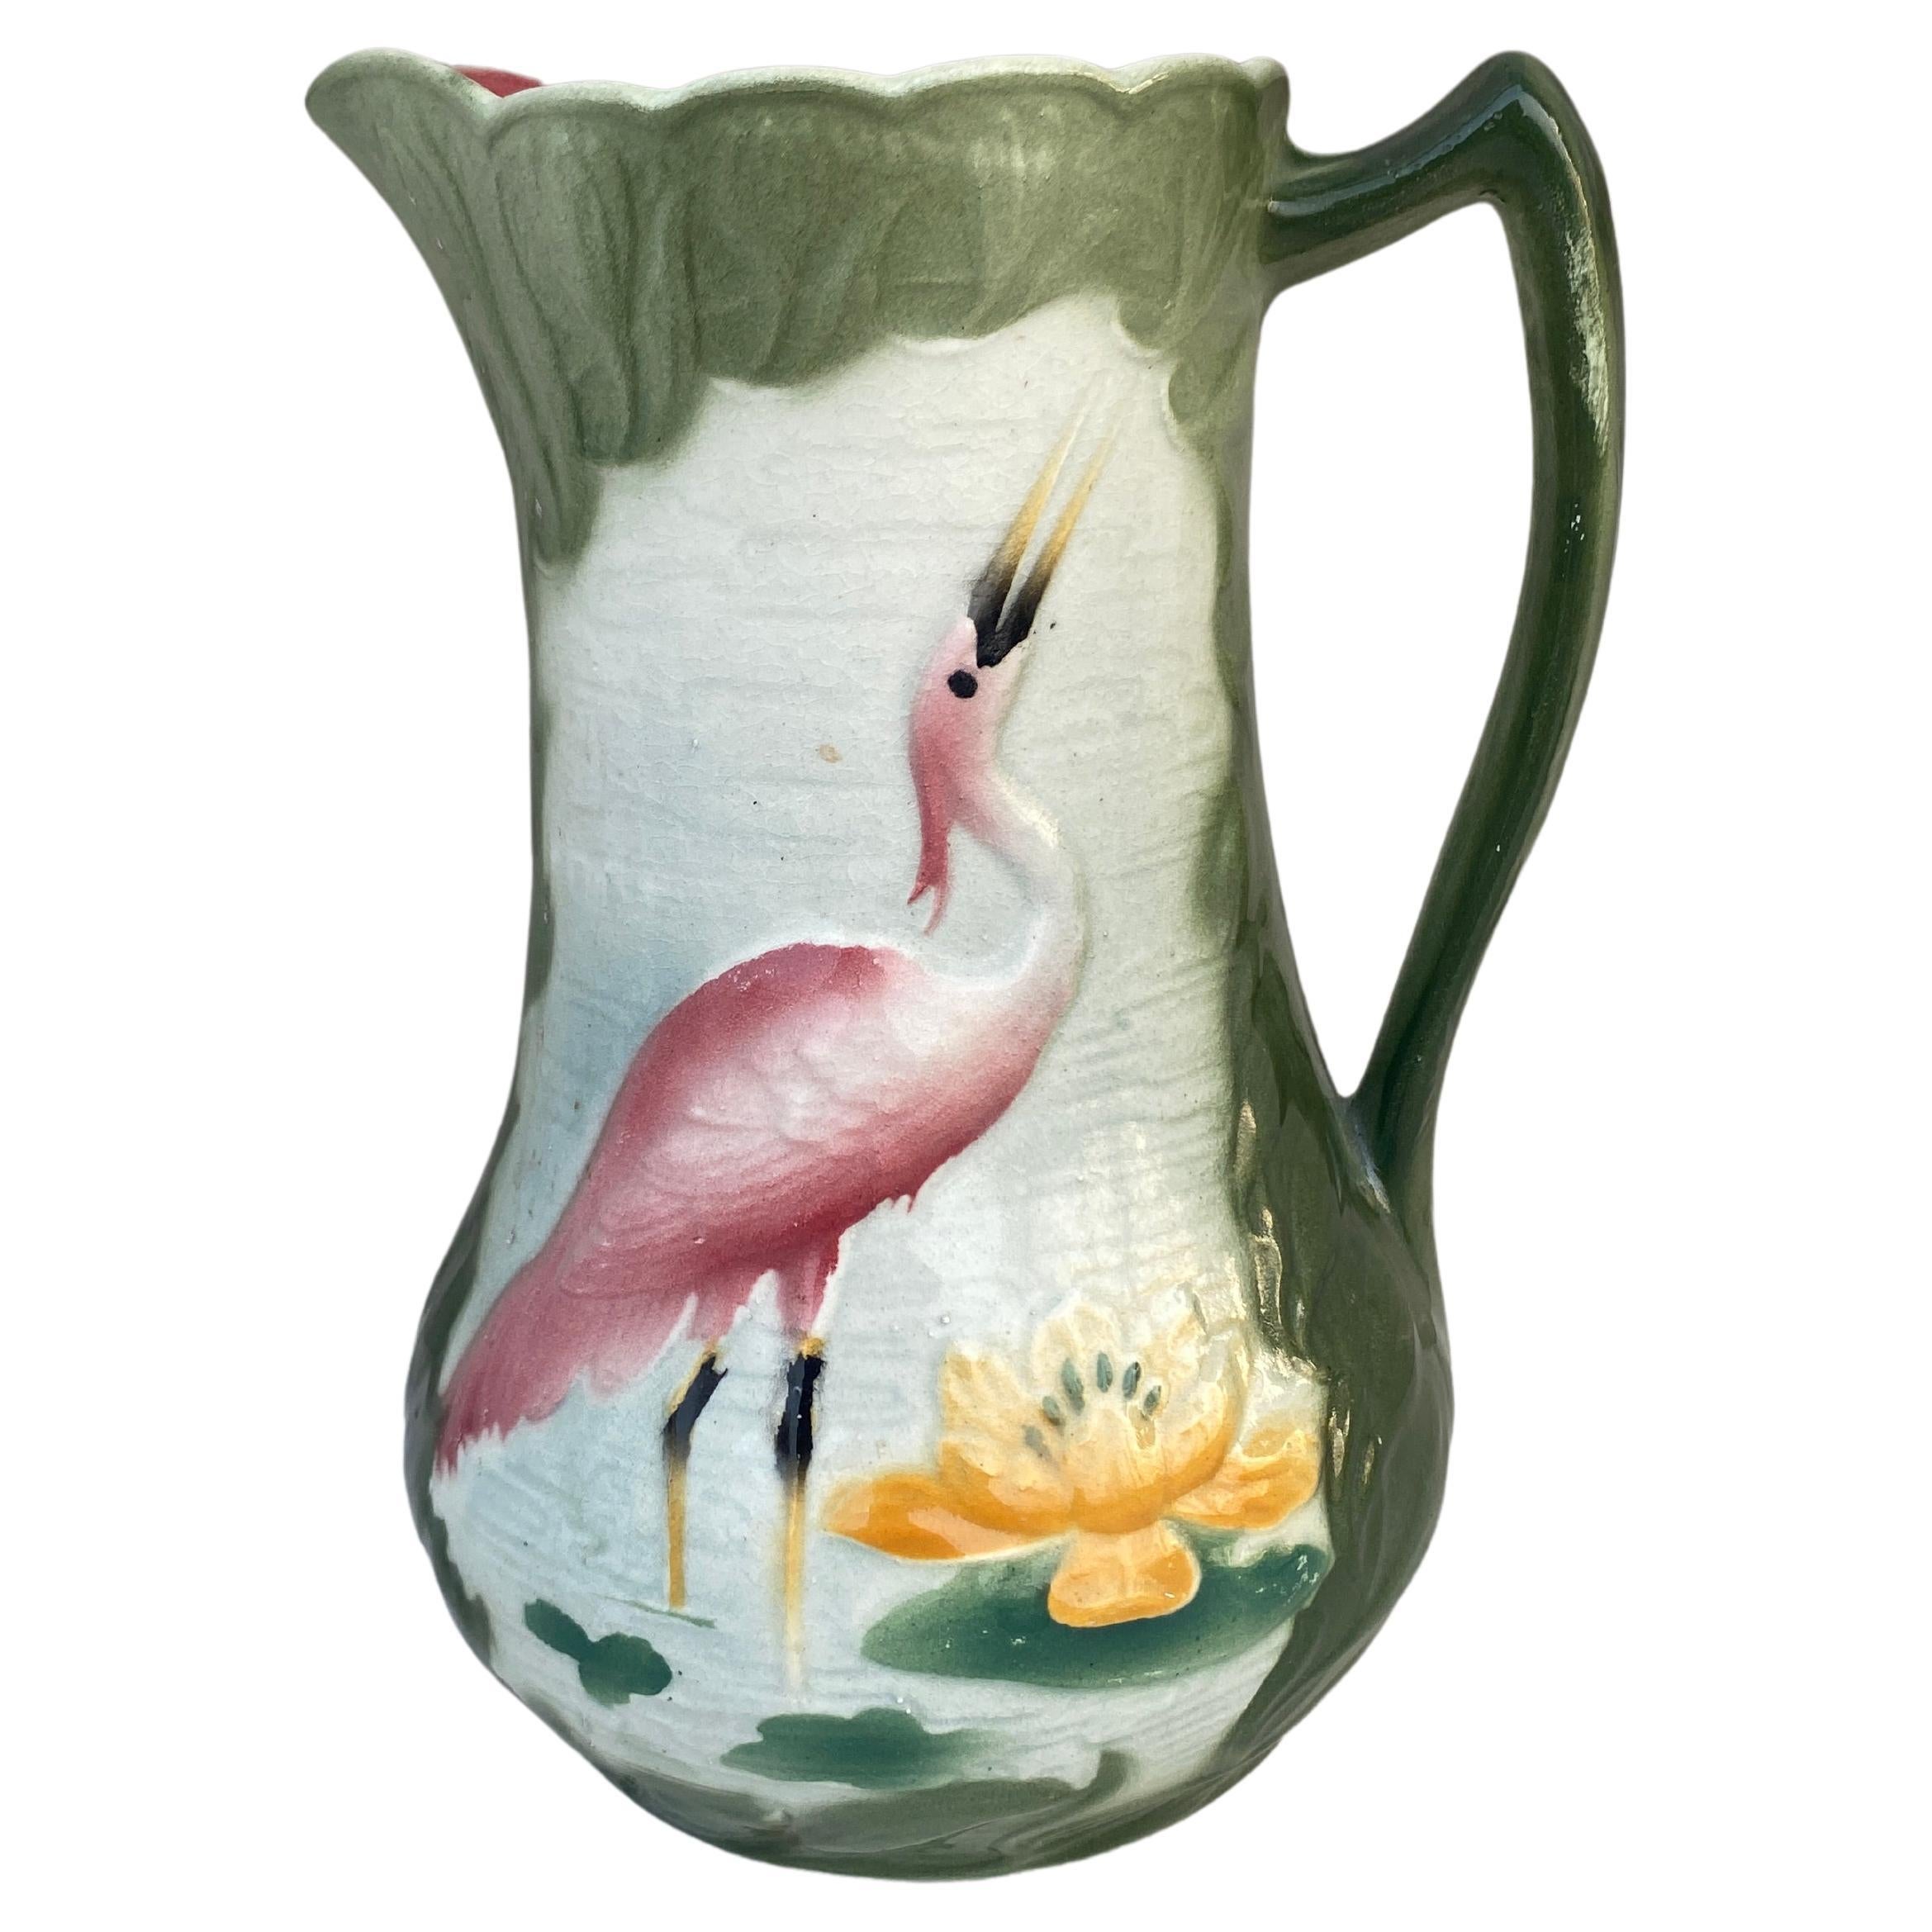 Elegant French Majolica Heron Pitcher signed Keller and Guerin Saint Clement, circa 1900.